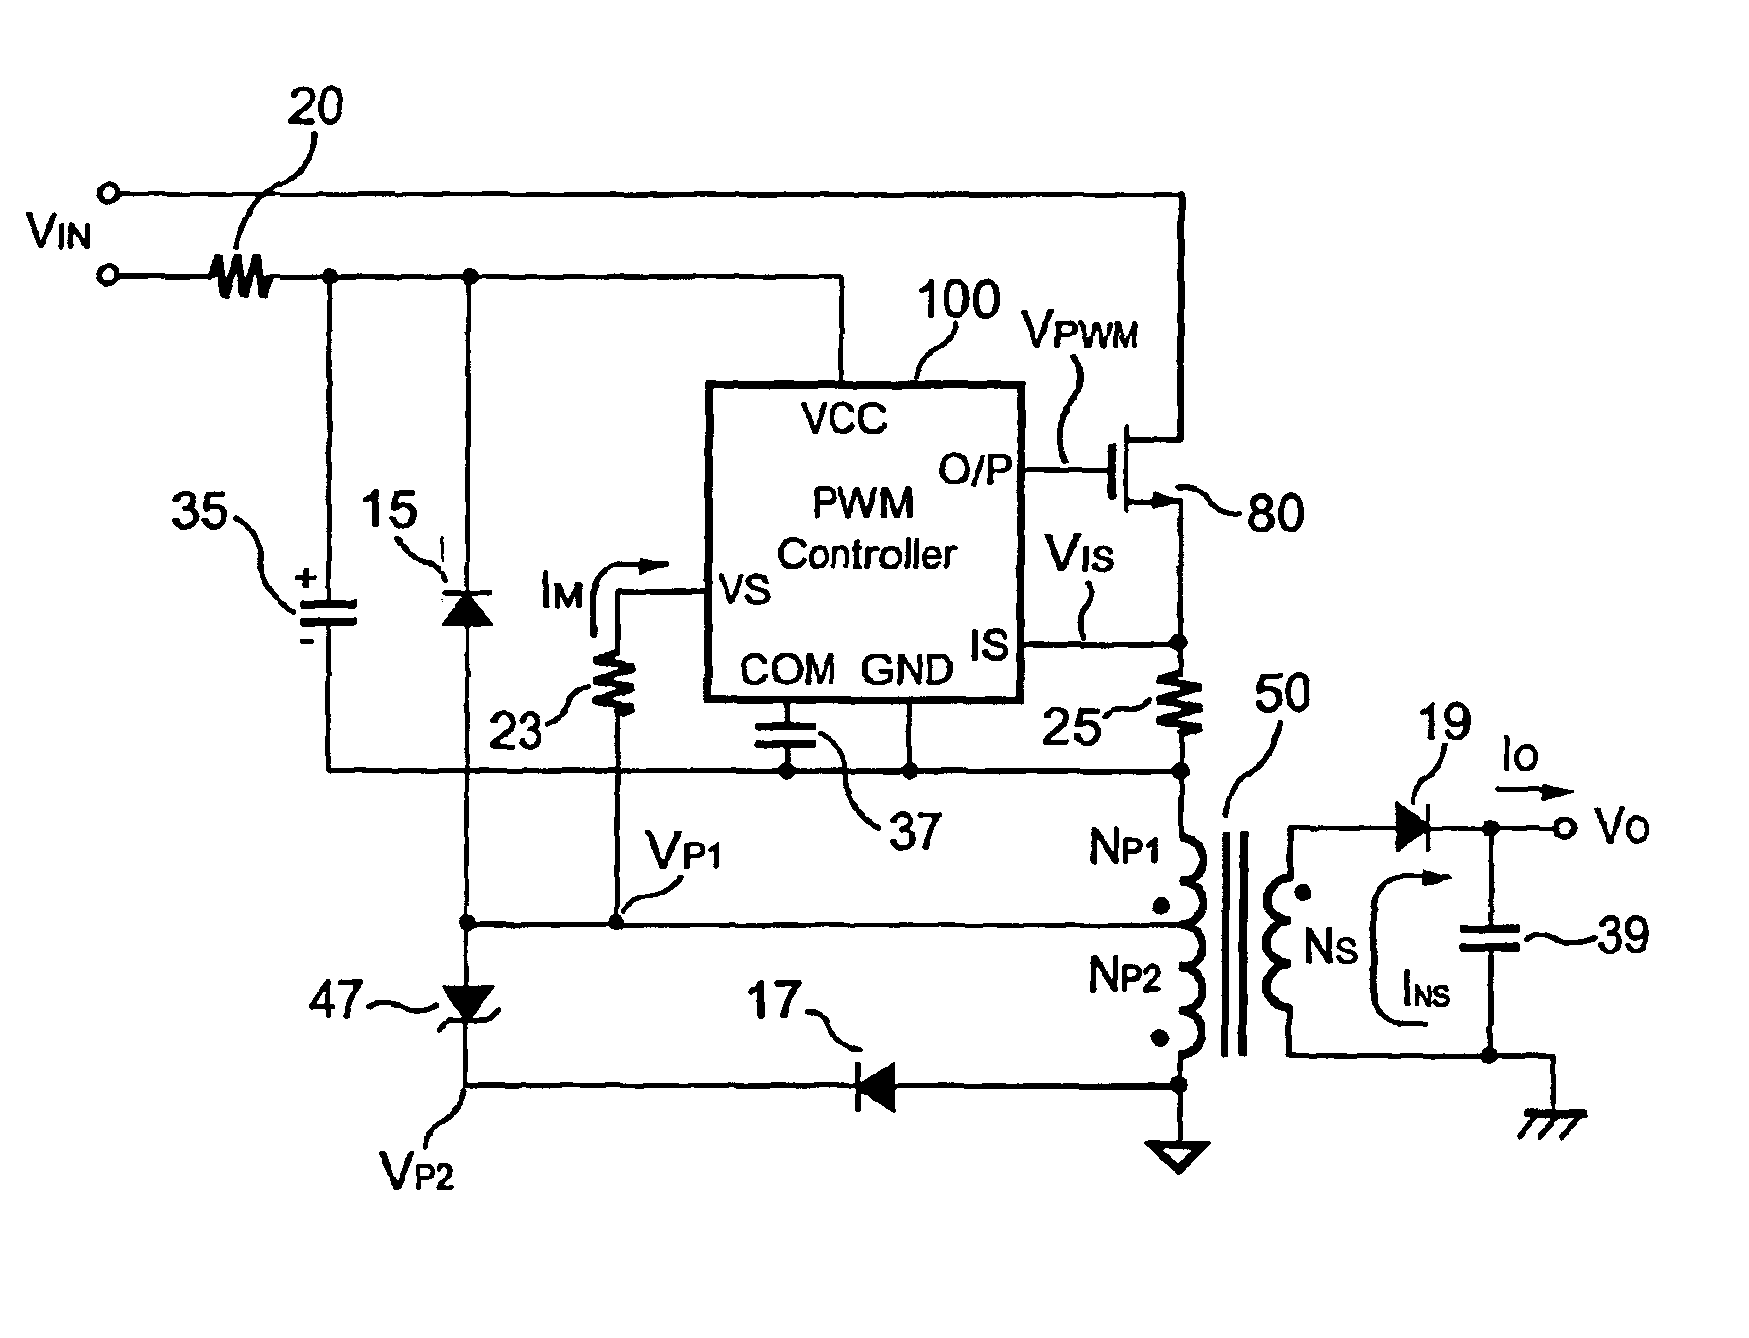 Primary-side controlled flyback power converter